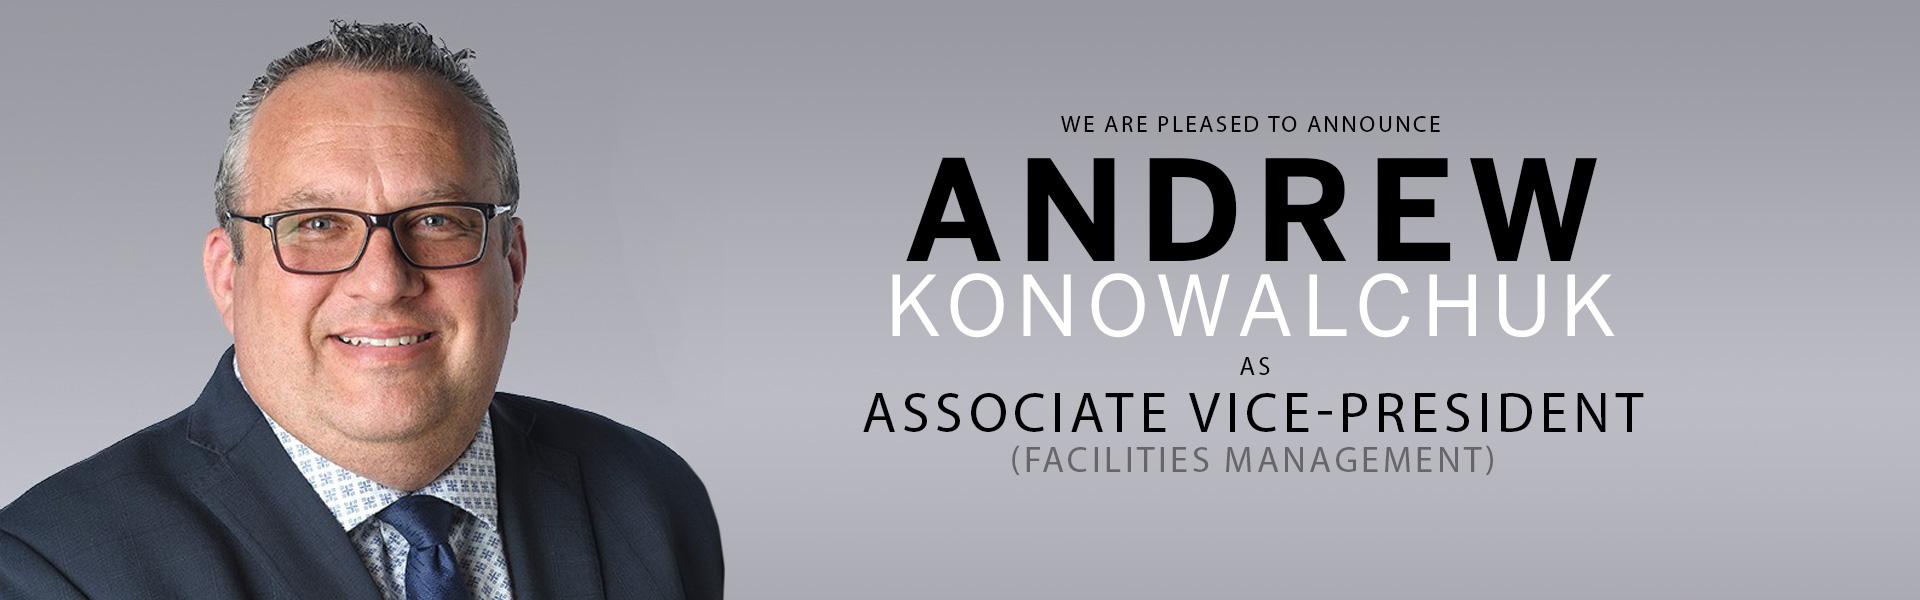 We are please to announce Andrew Konowalchuk as Associate Vice-President (Facilities Management)